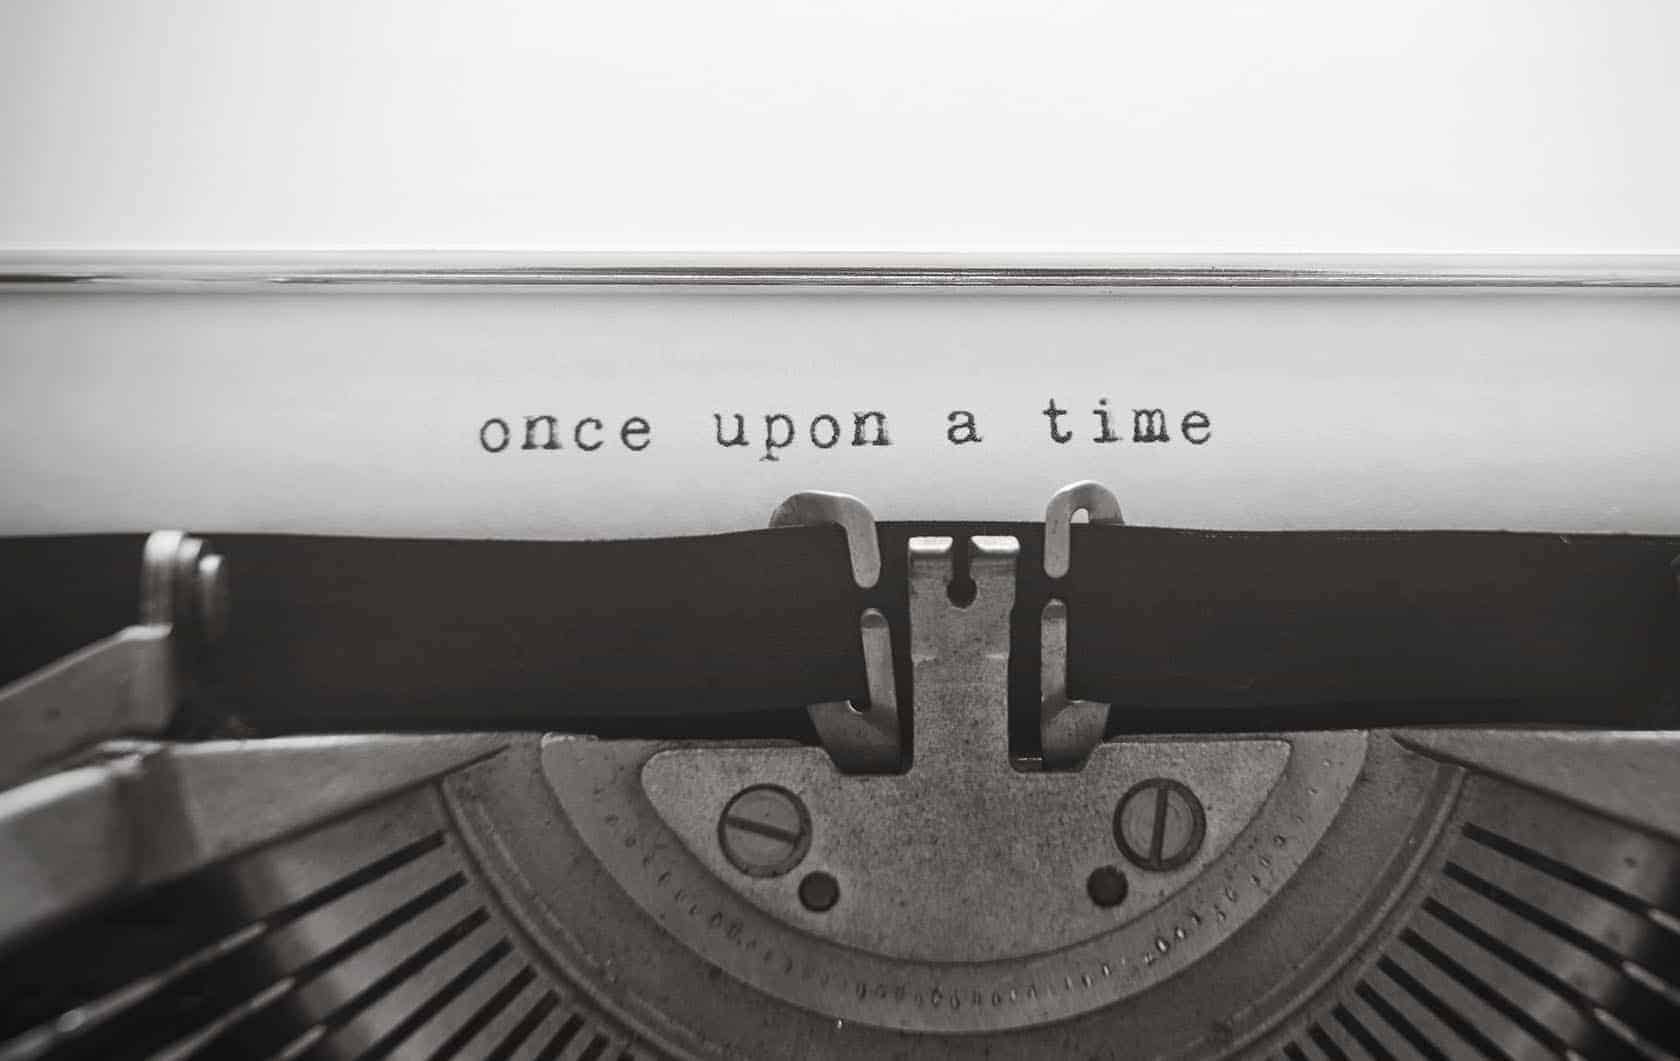 words "once upon a time" written with old typewriter